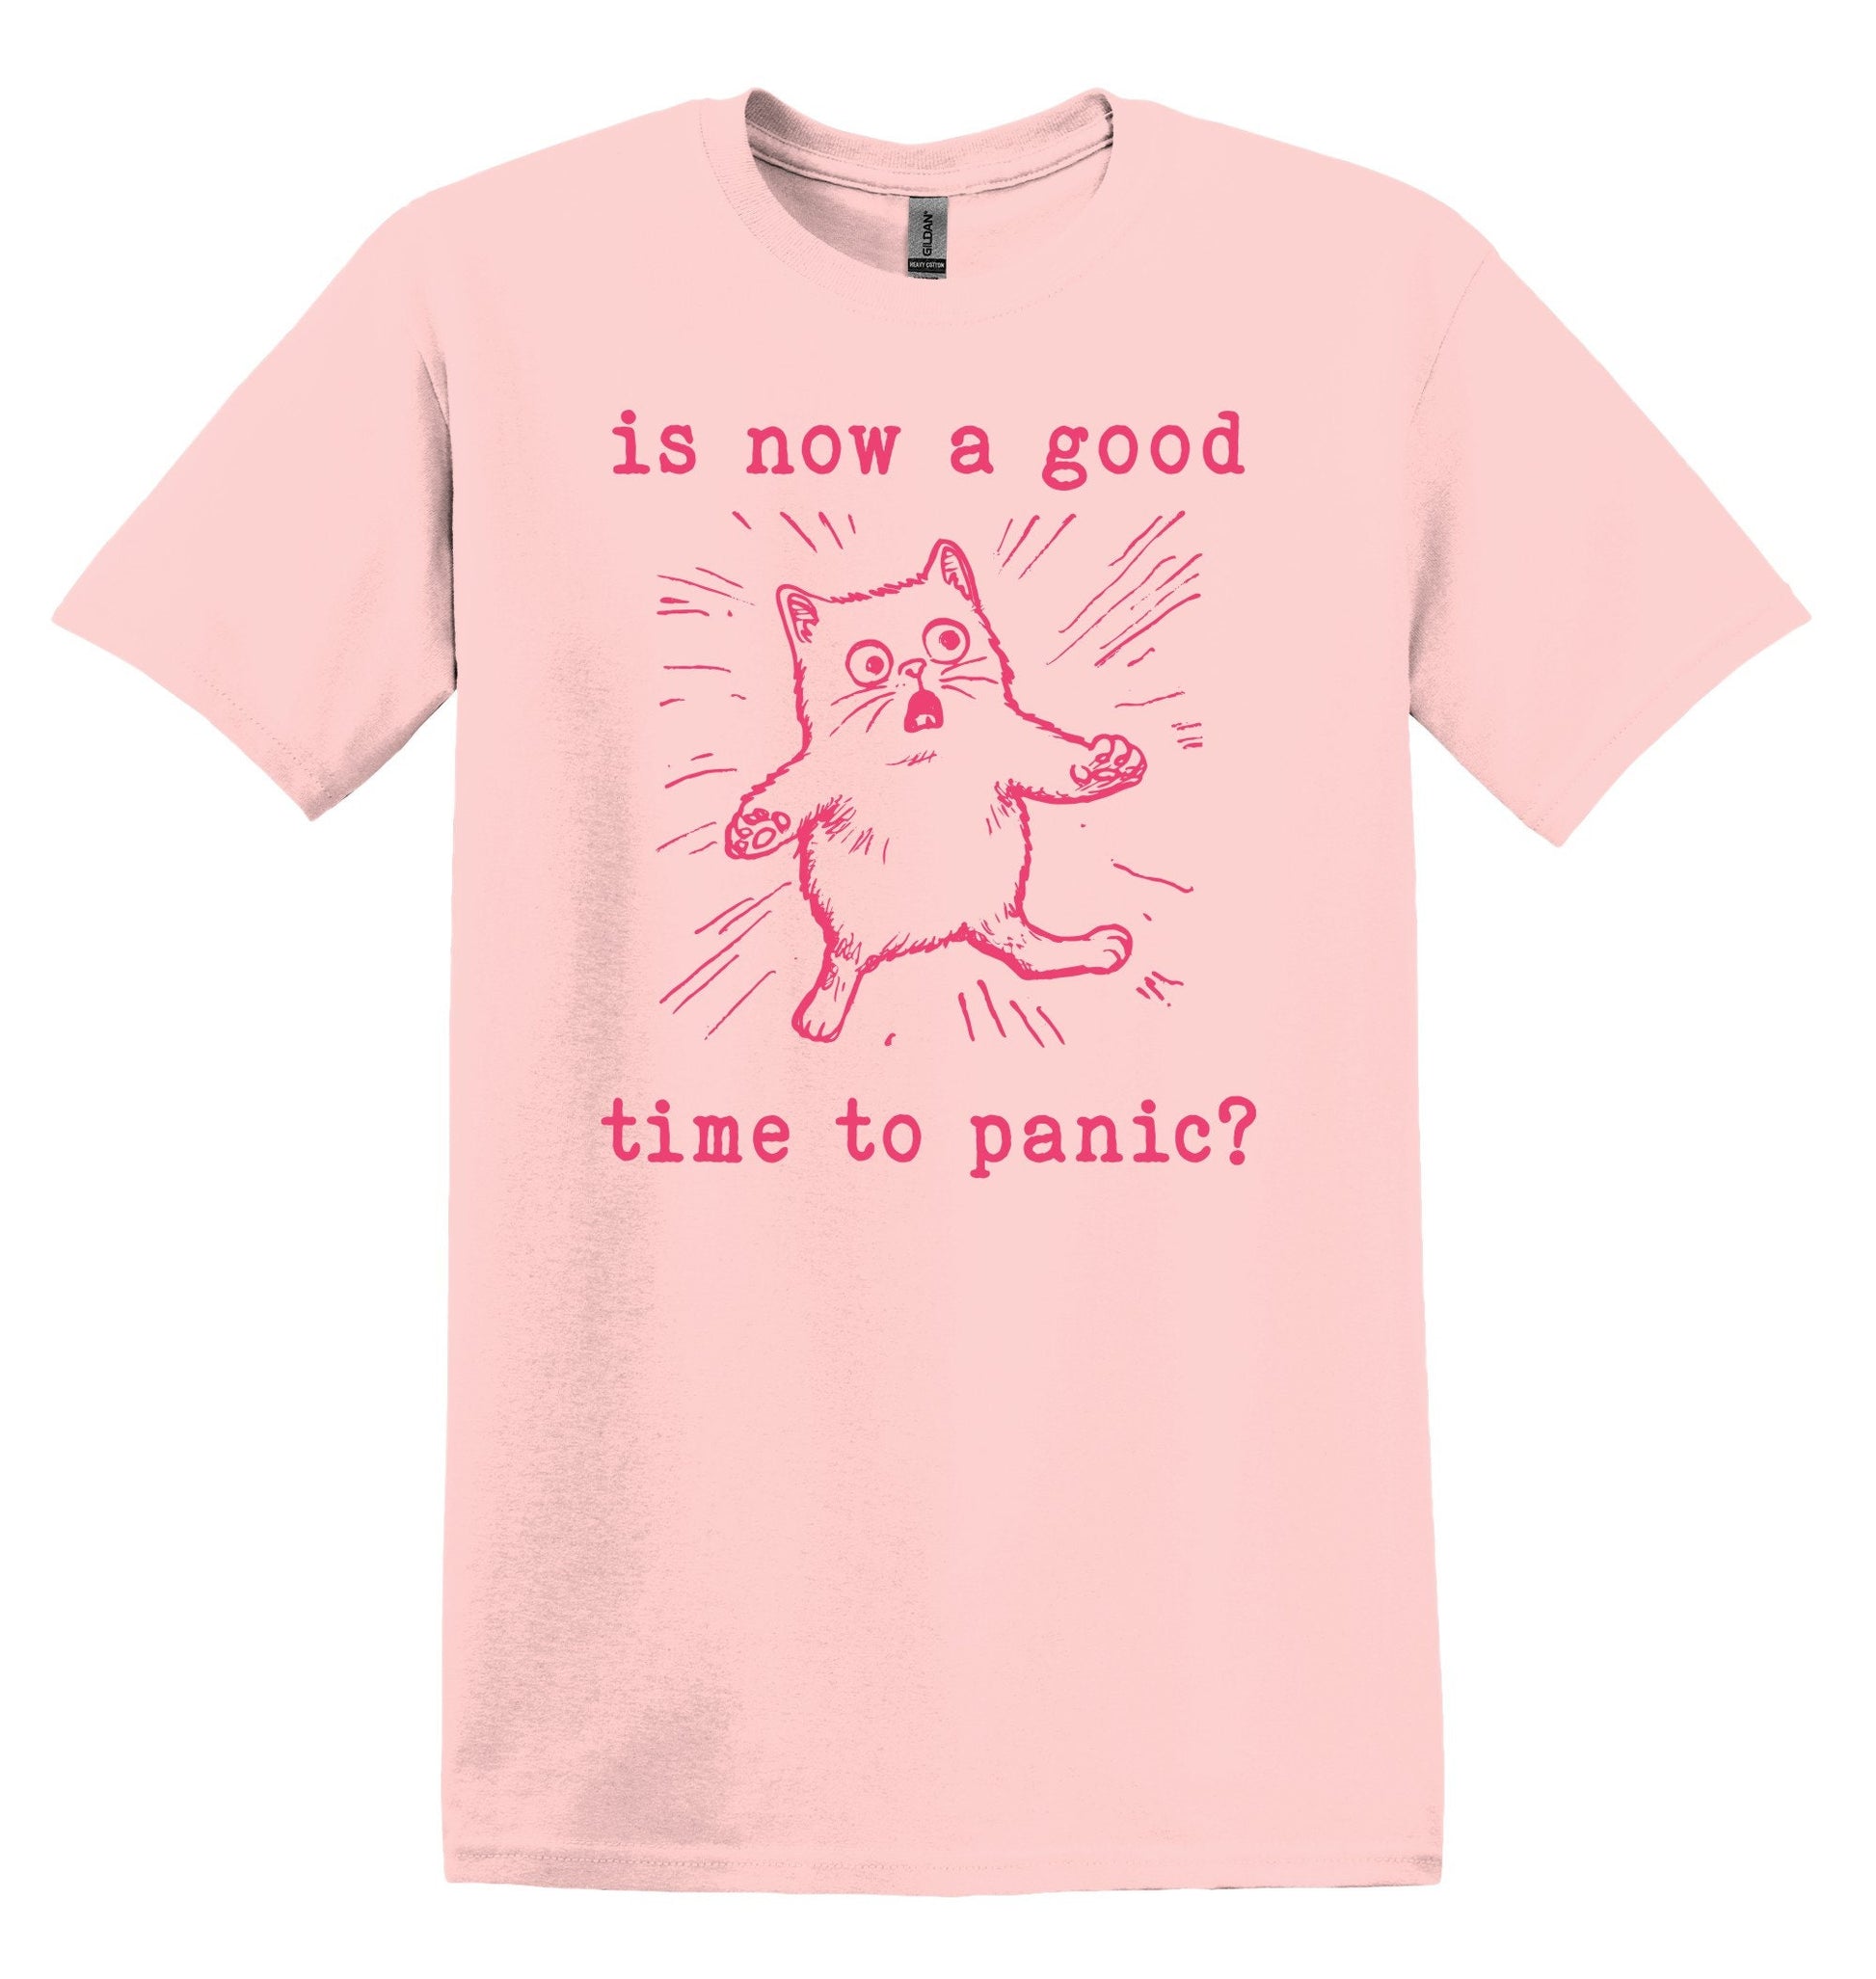 Is Now a Good Time To Panic Cat T-shirt Graphic Shirt Funny Adult TShirt Vintage Funny TShirt Nostalgia T-Shirt Relaxed Cotton Tee T-Shirt